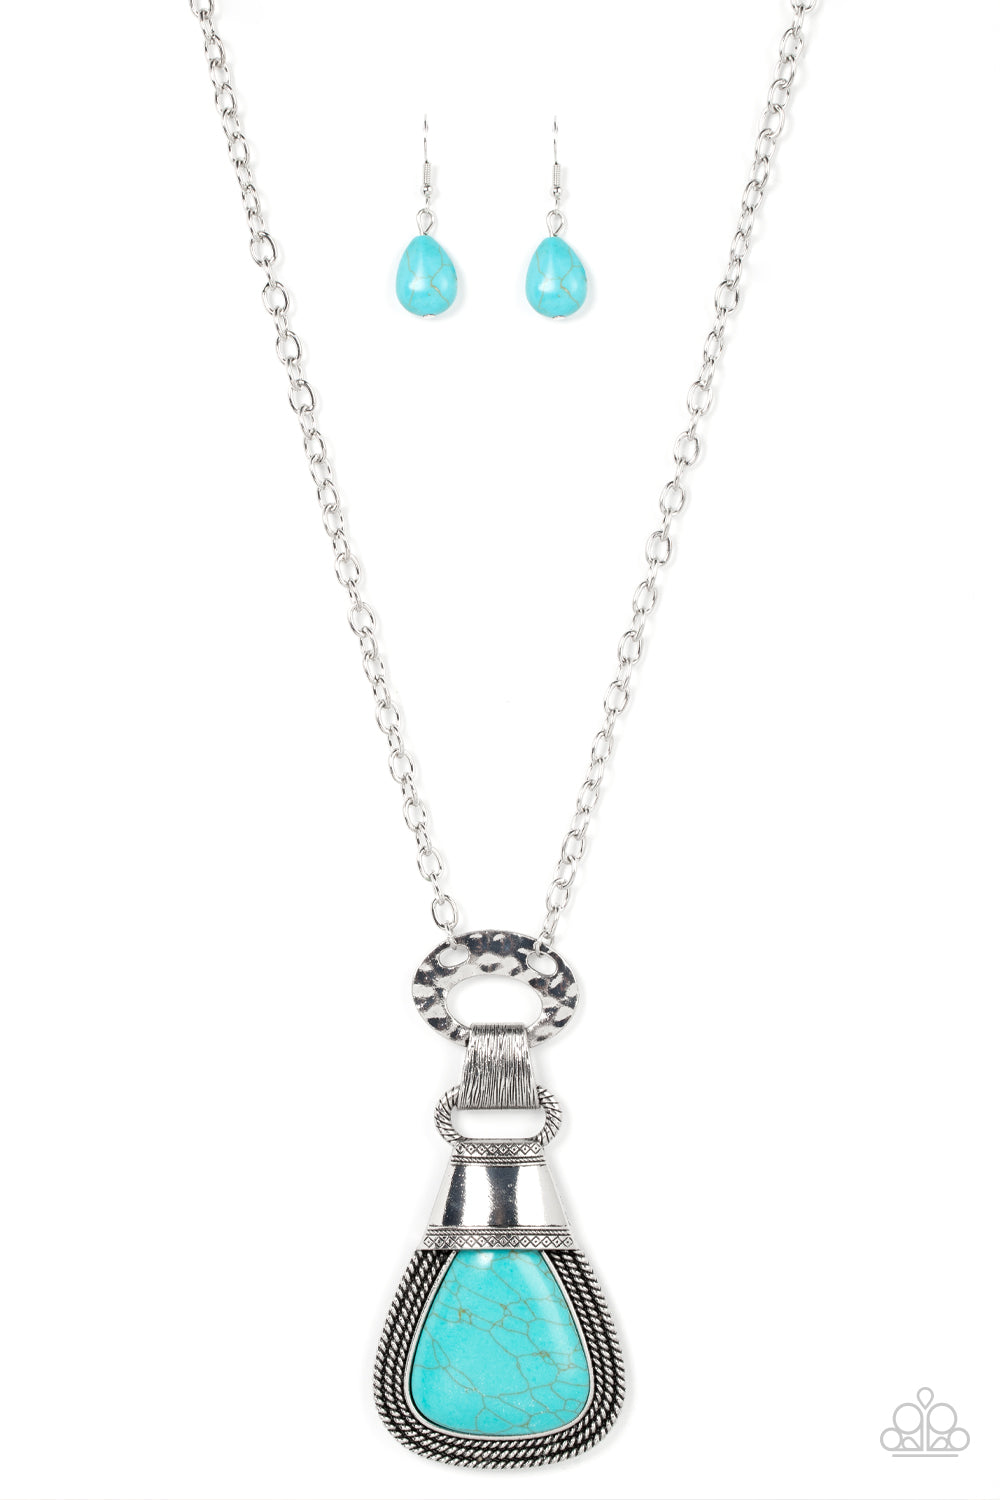 Rodeo Royale Turquoise Necklace - Paparazzi Accessories  An oversized turquoise stone is encased in a silver frame made up of layers of rope-like texture and topped with an antiqued silver adornment stamped in rustic patterns. The refreshing pendant swings from a hammered silver ring and clasp at the bottom of a lengthened silver chain, resulting in a captivating finish. Features an adjustable clasp closure.  Sold as one individual necklace. Includes one pair of matching earrings.  SKU: P2ST-BLXX-185XX